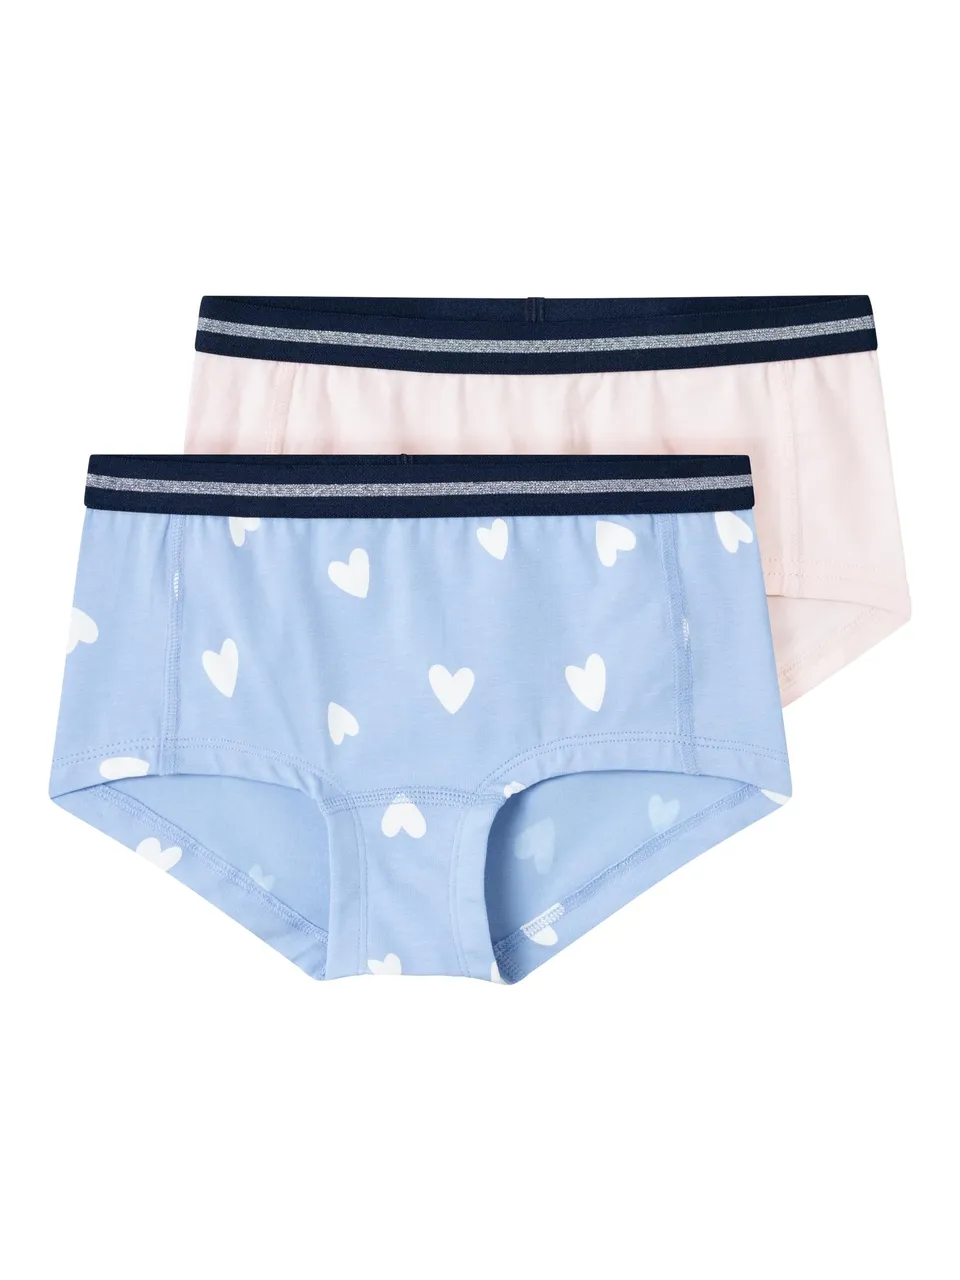 Name It Hipster Serenity Heart Panties 2 Units 9-10 Years